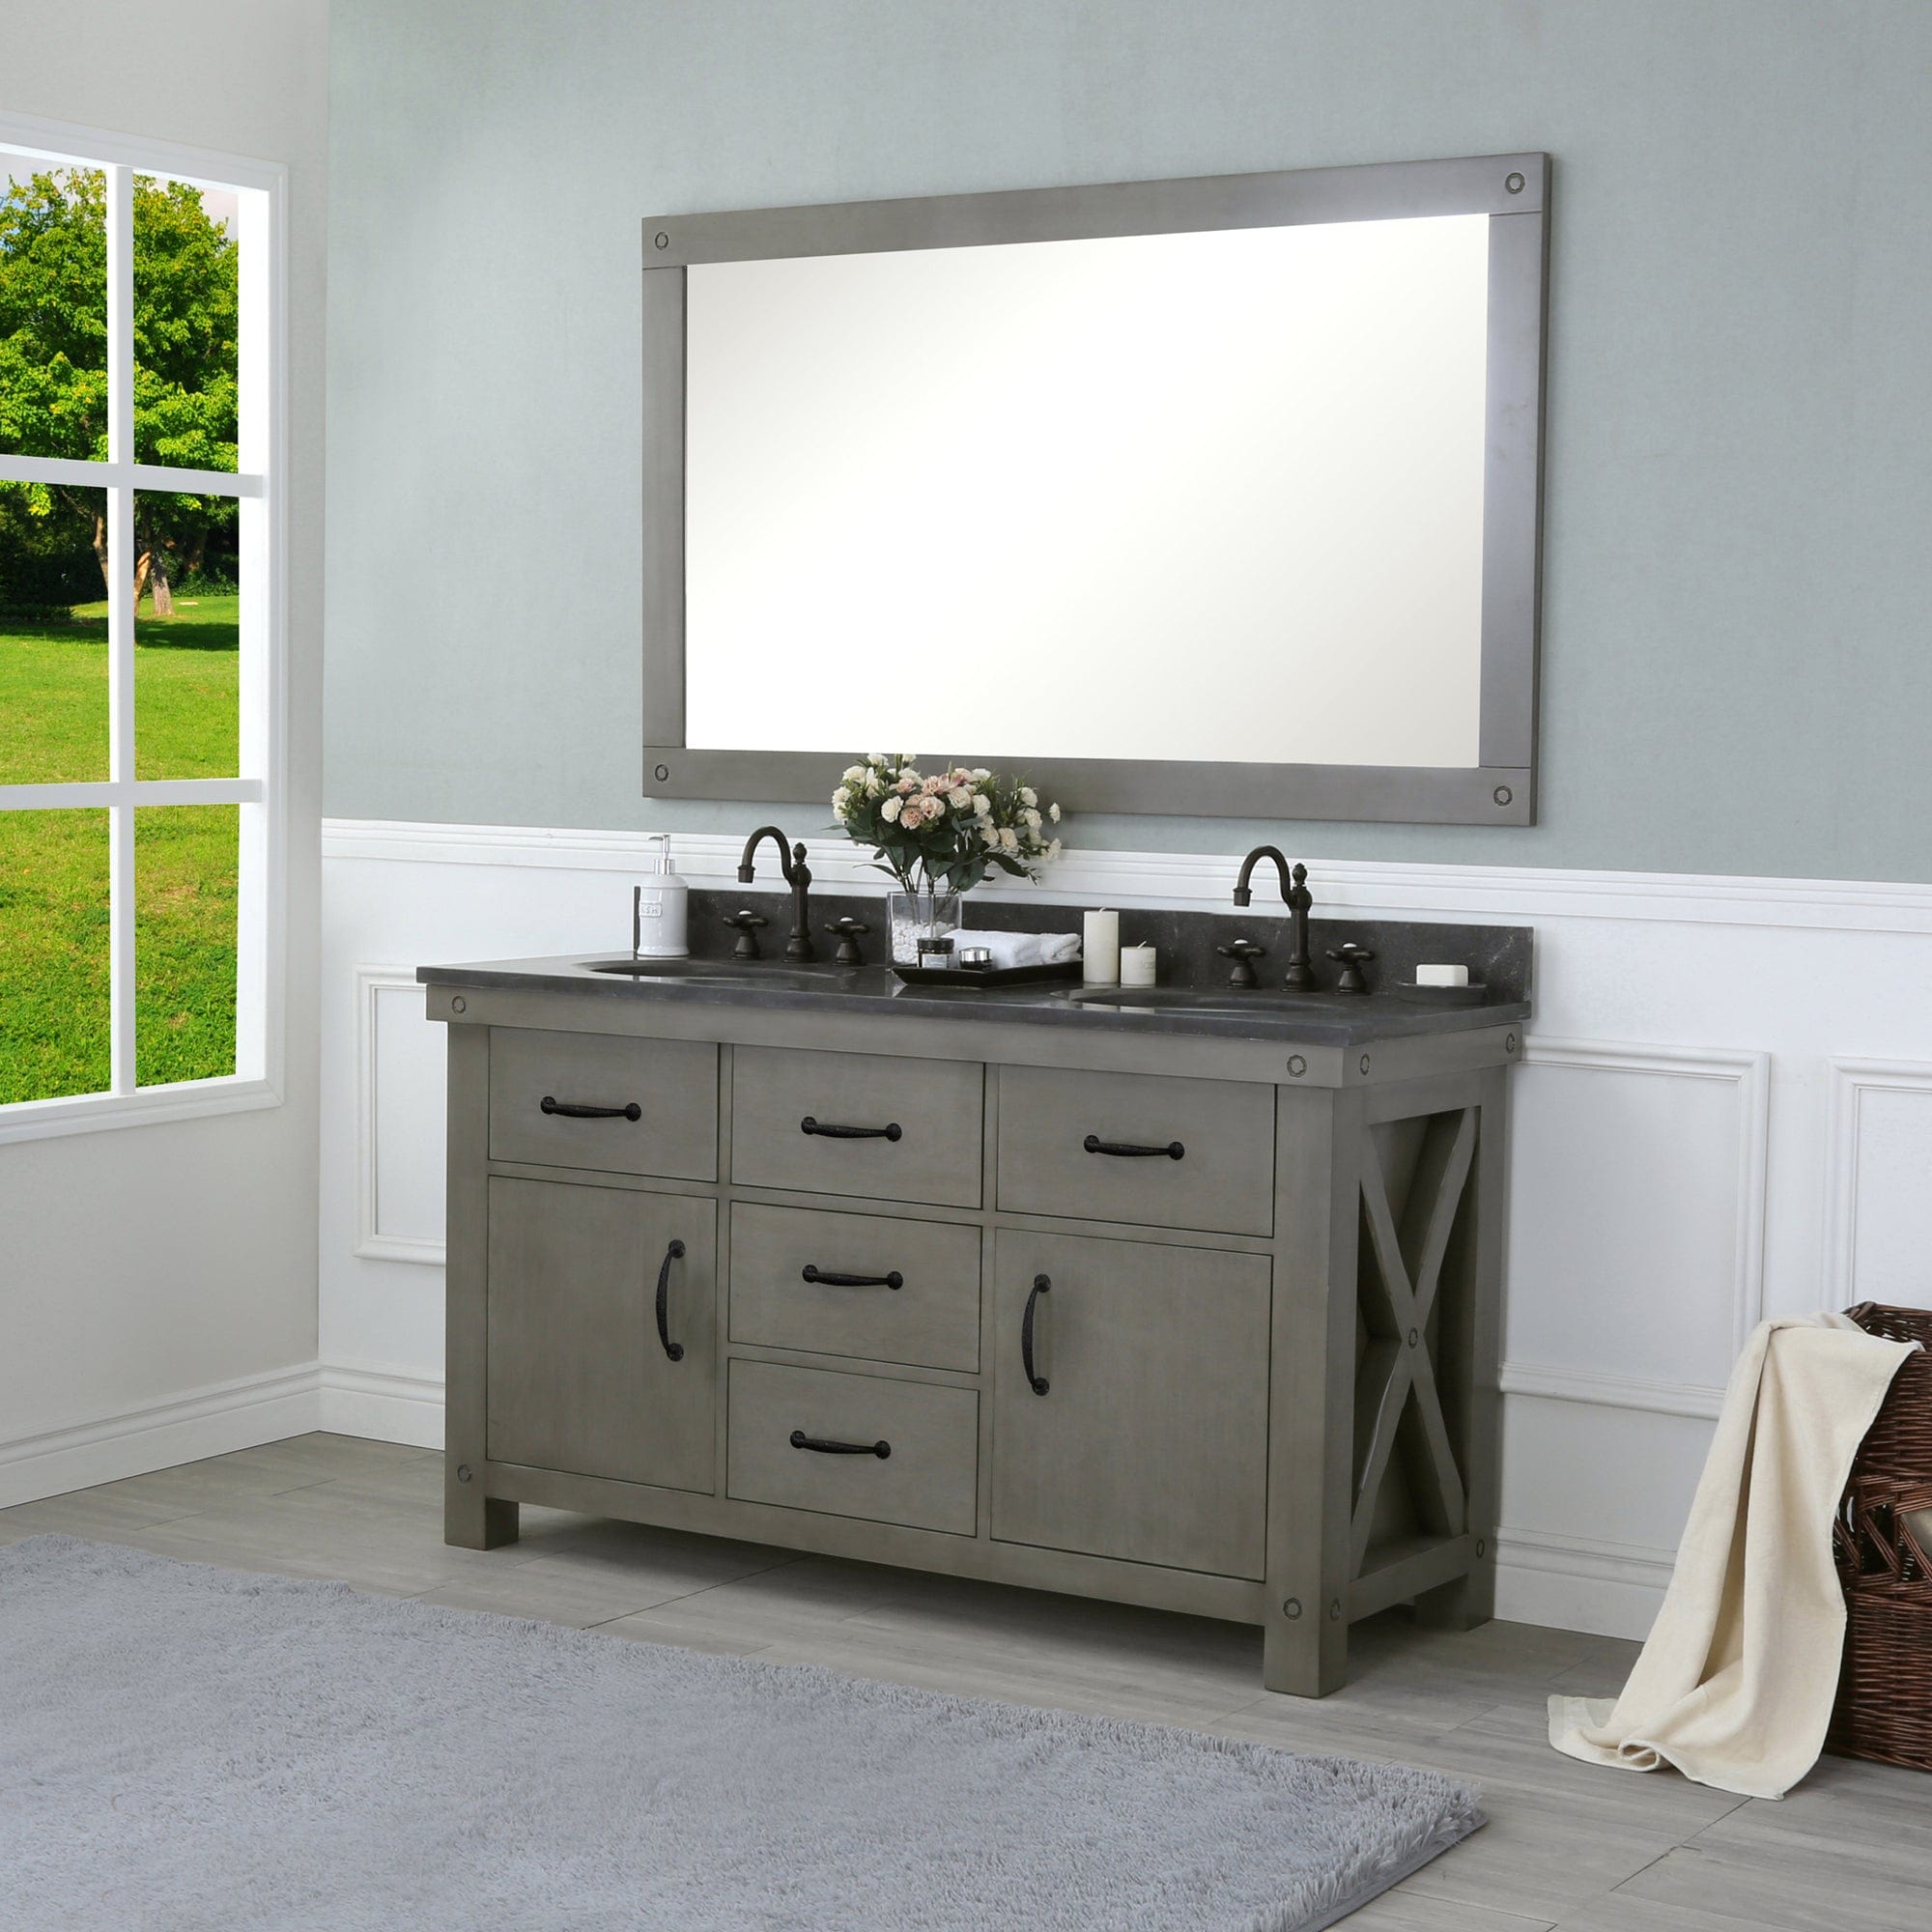 60 Inch Grizzle Grey Double Sink Bathroom Vanity With Mirror And Faucets With Blue Limestone Counter Top From The ABERDEEN Collection - Molaix732030749702Bathroom VanitiesAB60BL03GG-A60BX1203